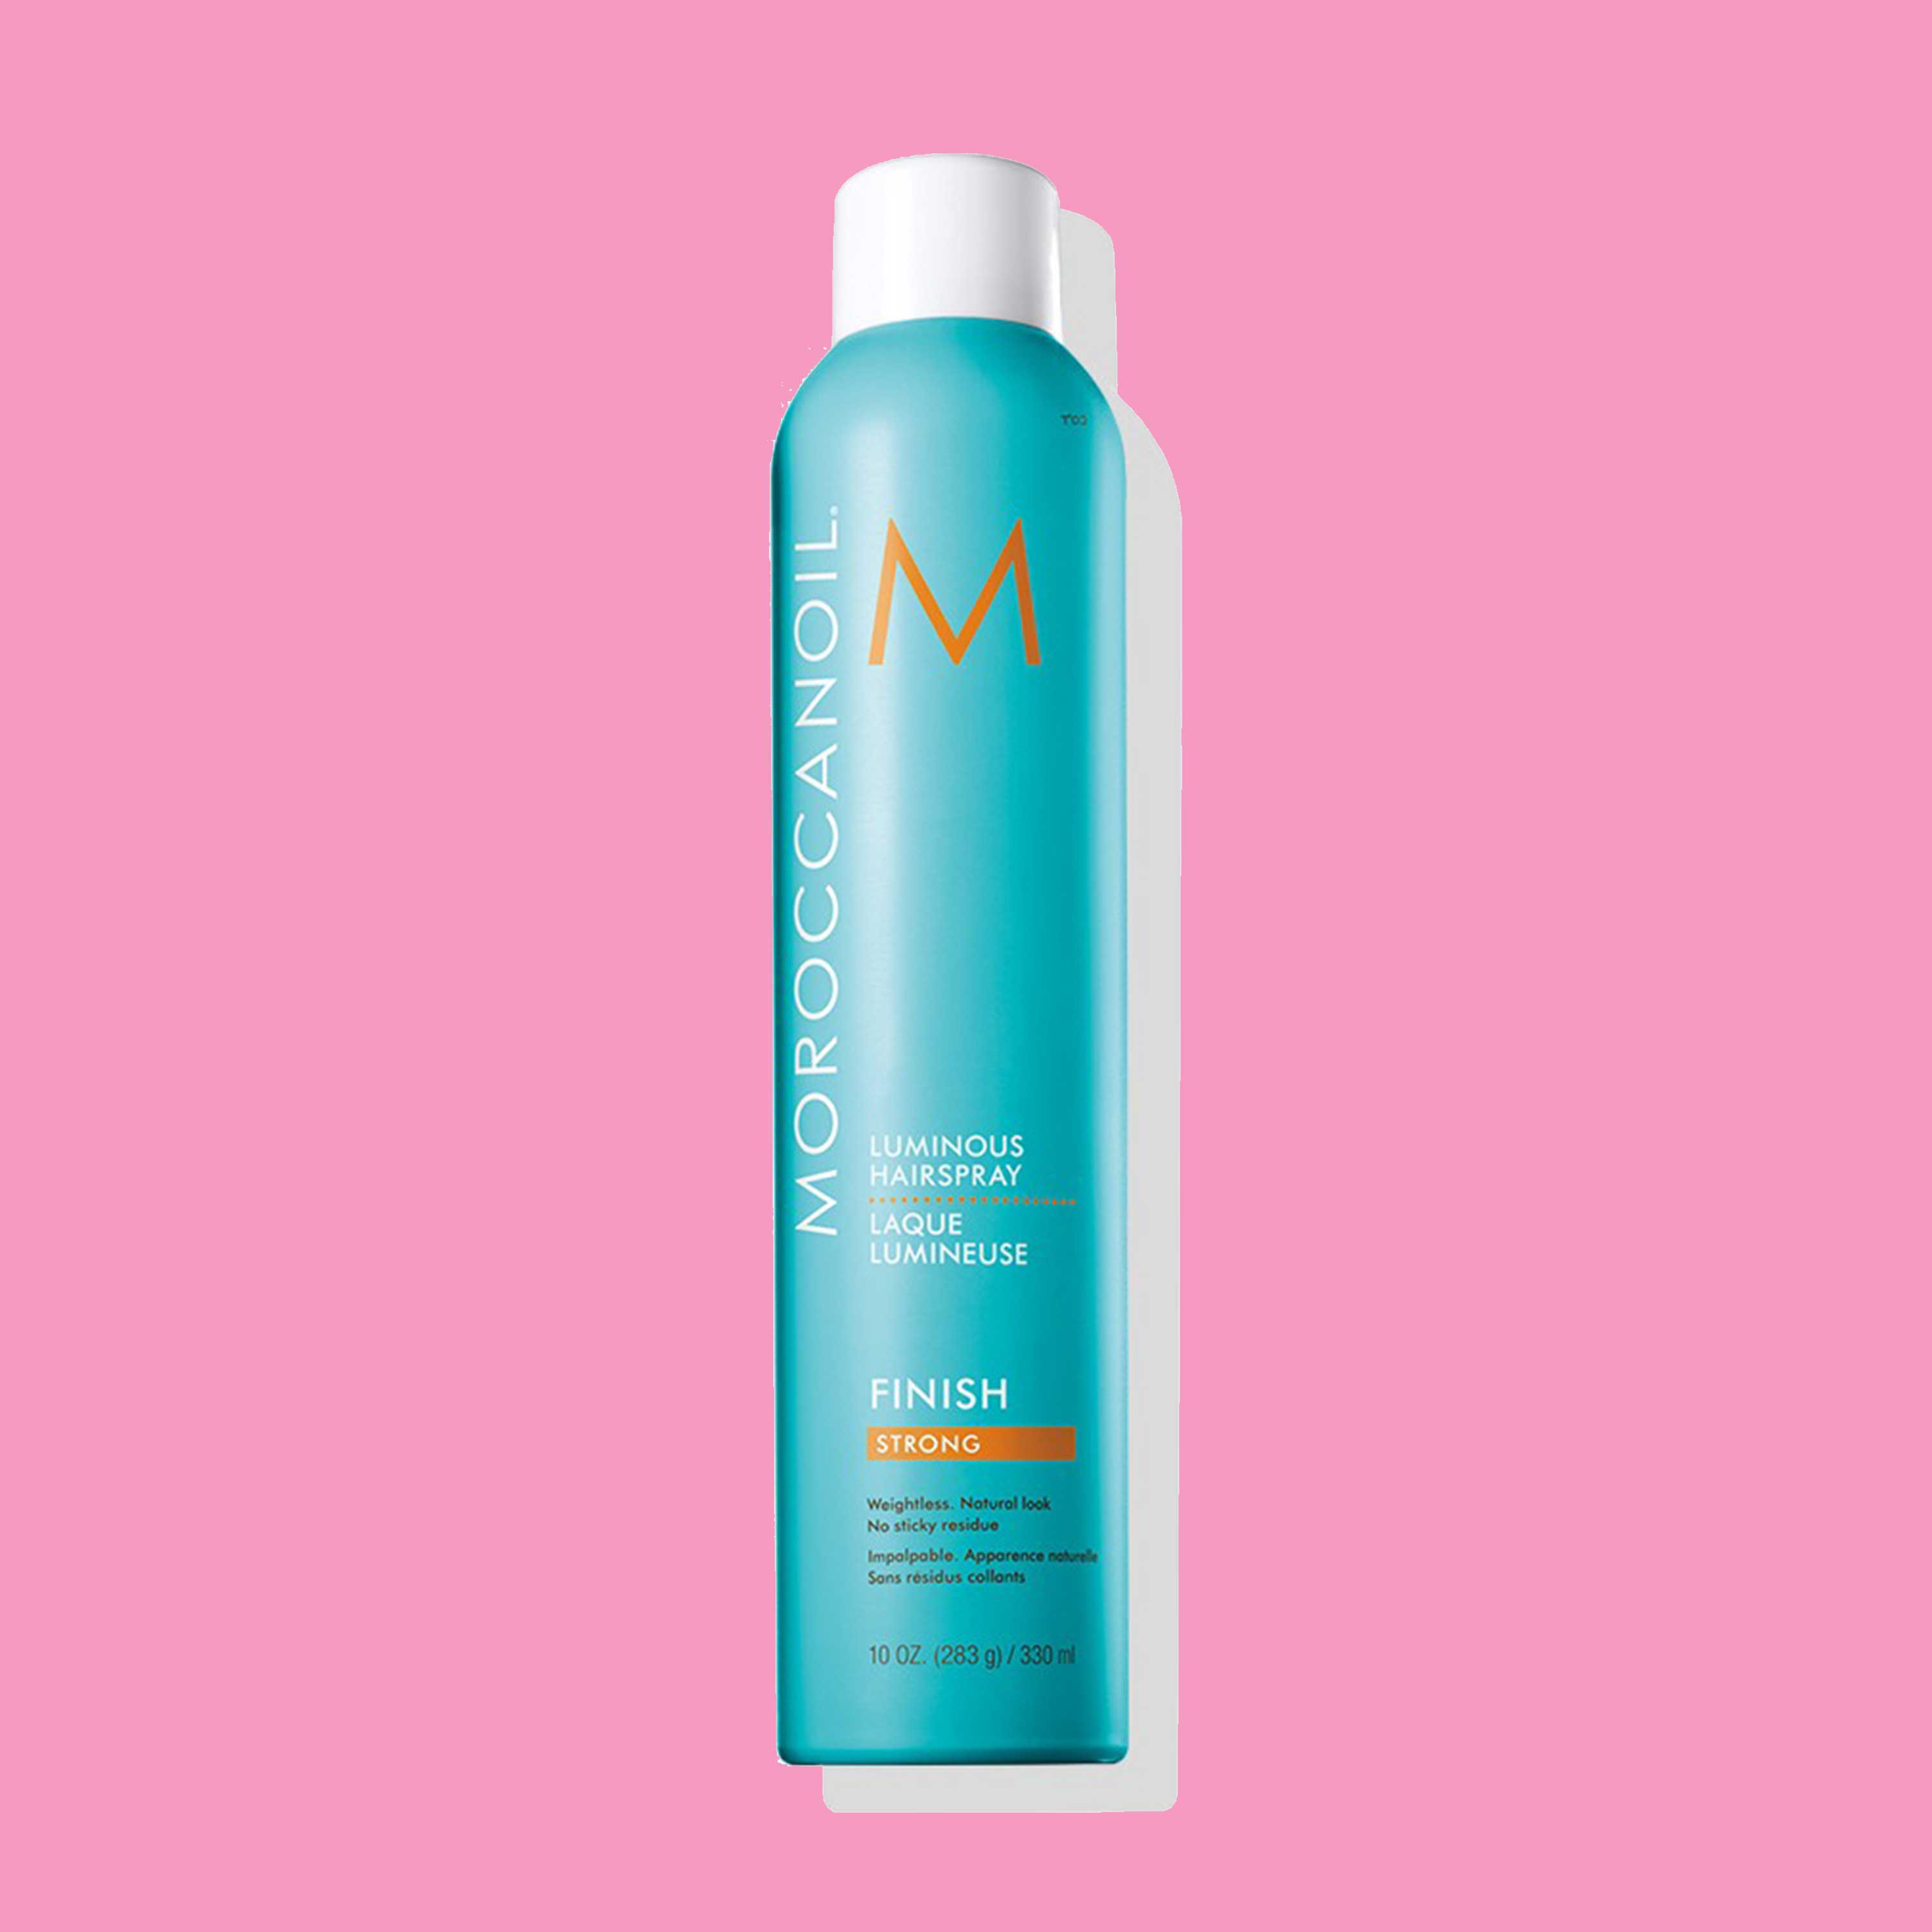 7 Underrated Ways To Use Hairspray On Textured Hair
